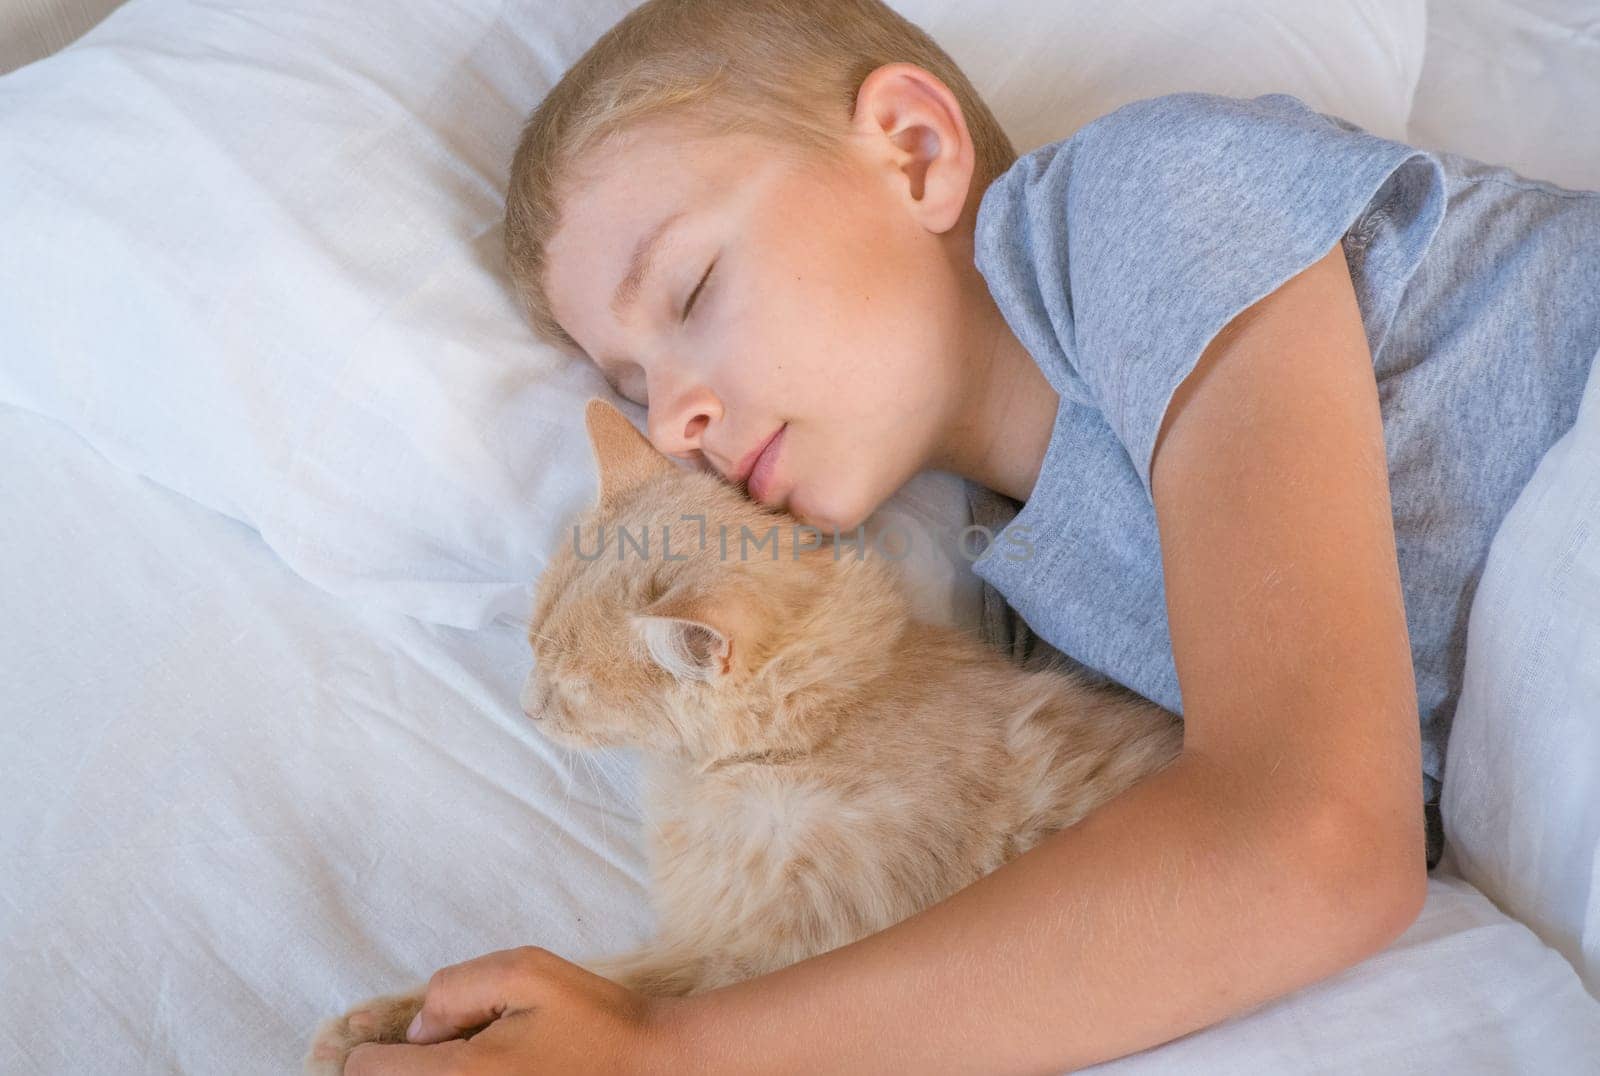 A child in bed cannot fall asleep, yawns, grimaces and plays with a ginger cat